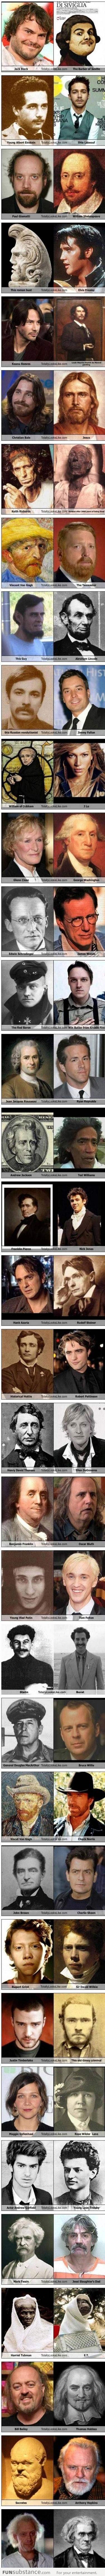 Not sure if time travel or look-alike